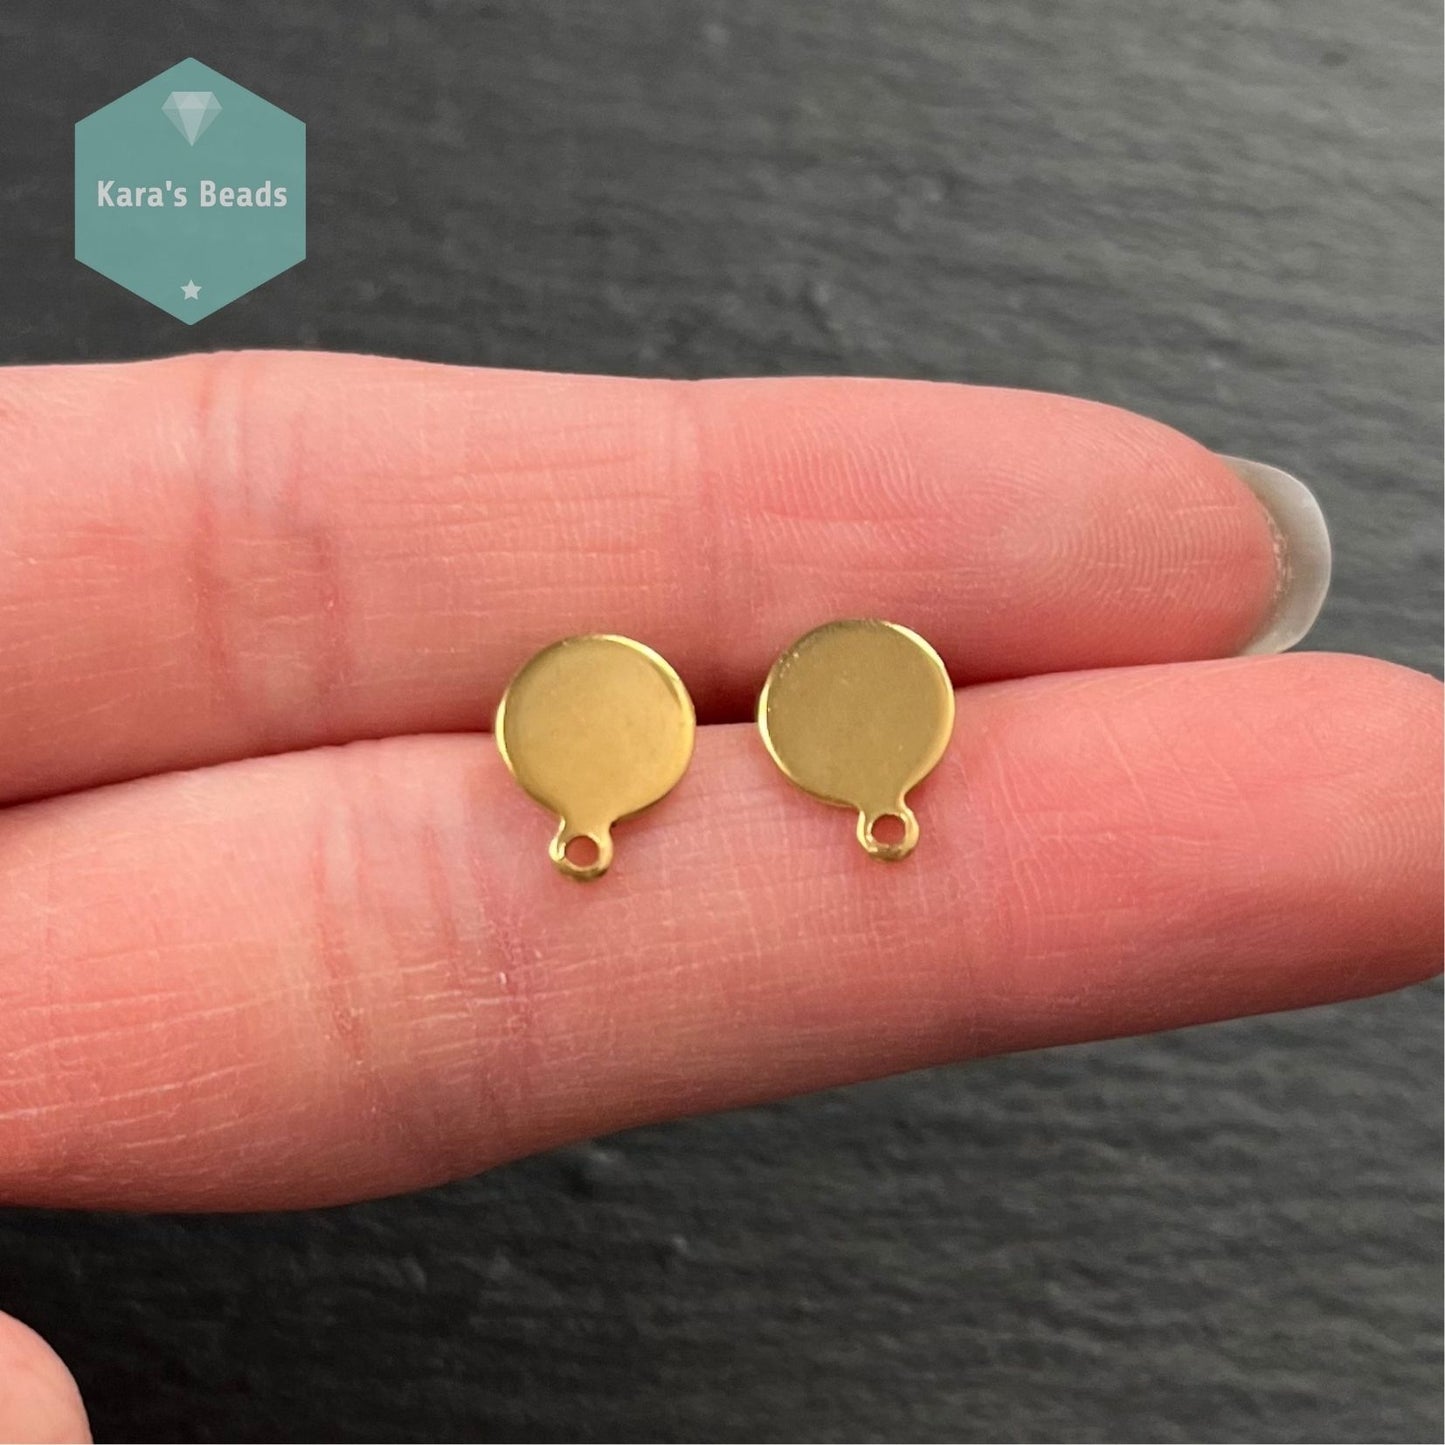 Stainless Steel Round Earring Stud Posts Gold 1 pair